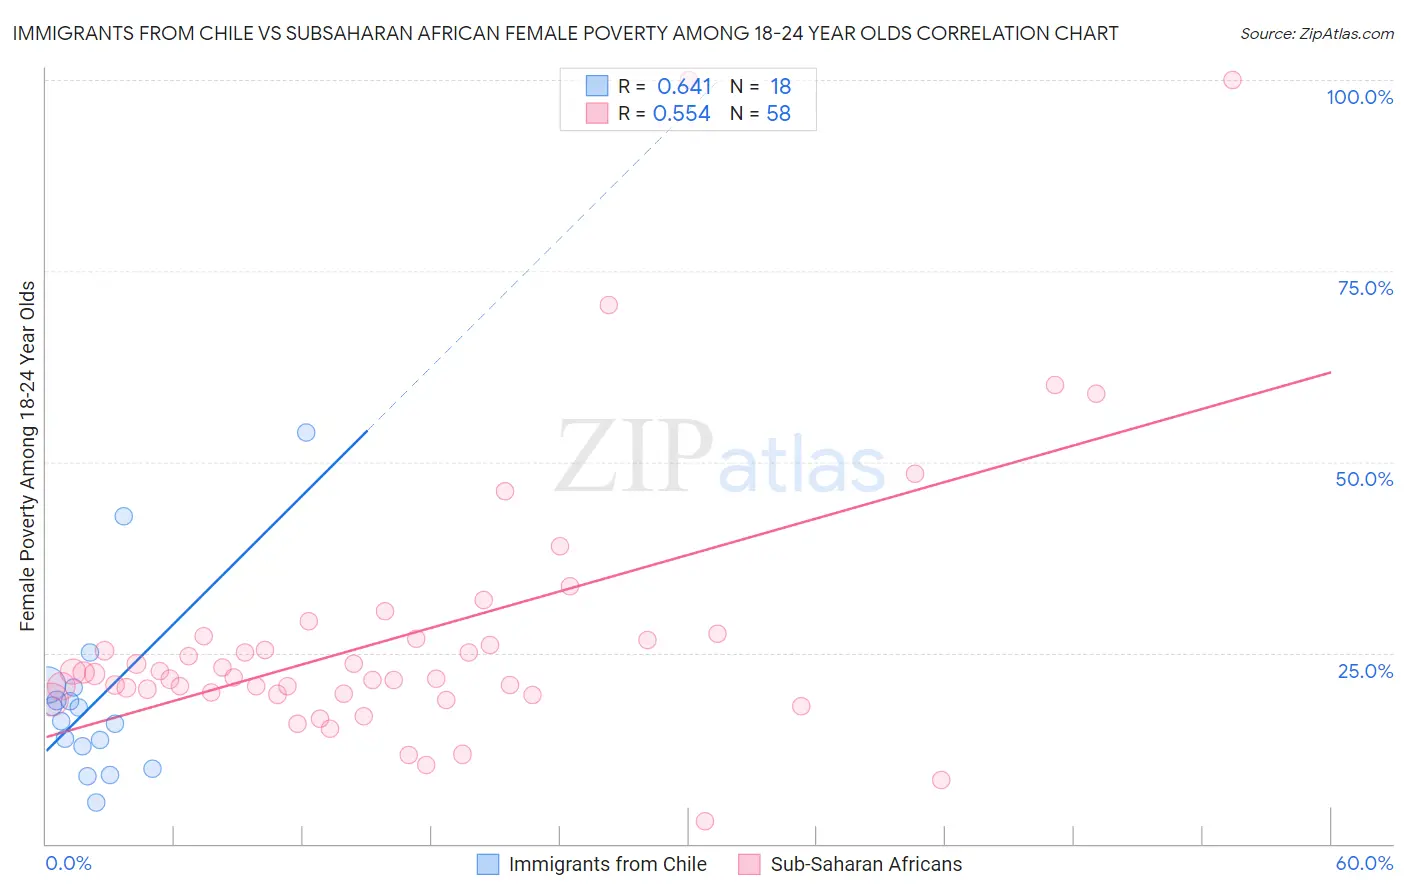 Immigrants from Chile vs Subsaharan African Female Poverty Among 18-24 Year Olds